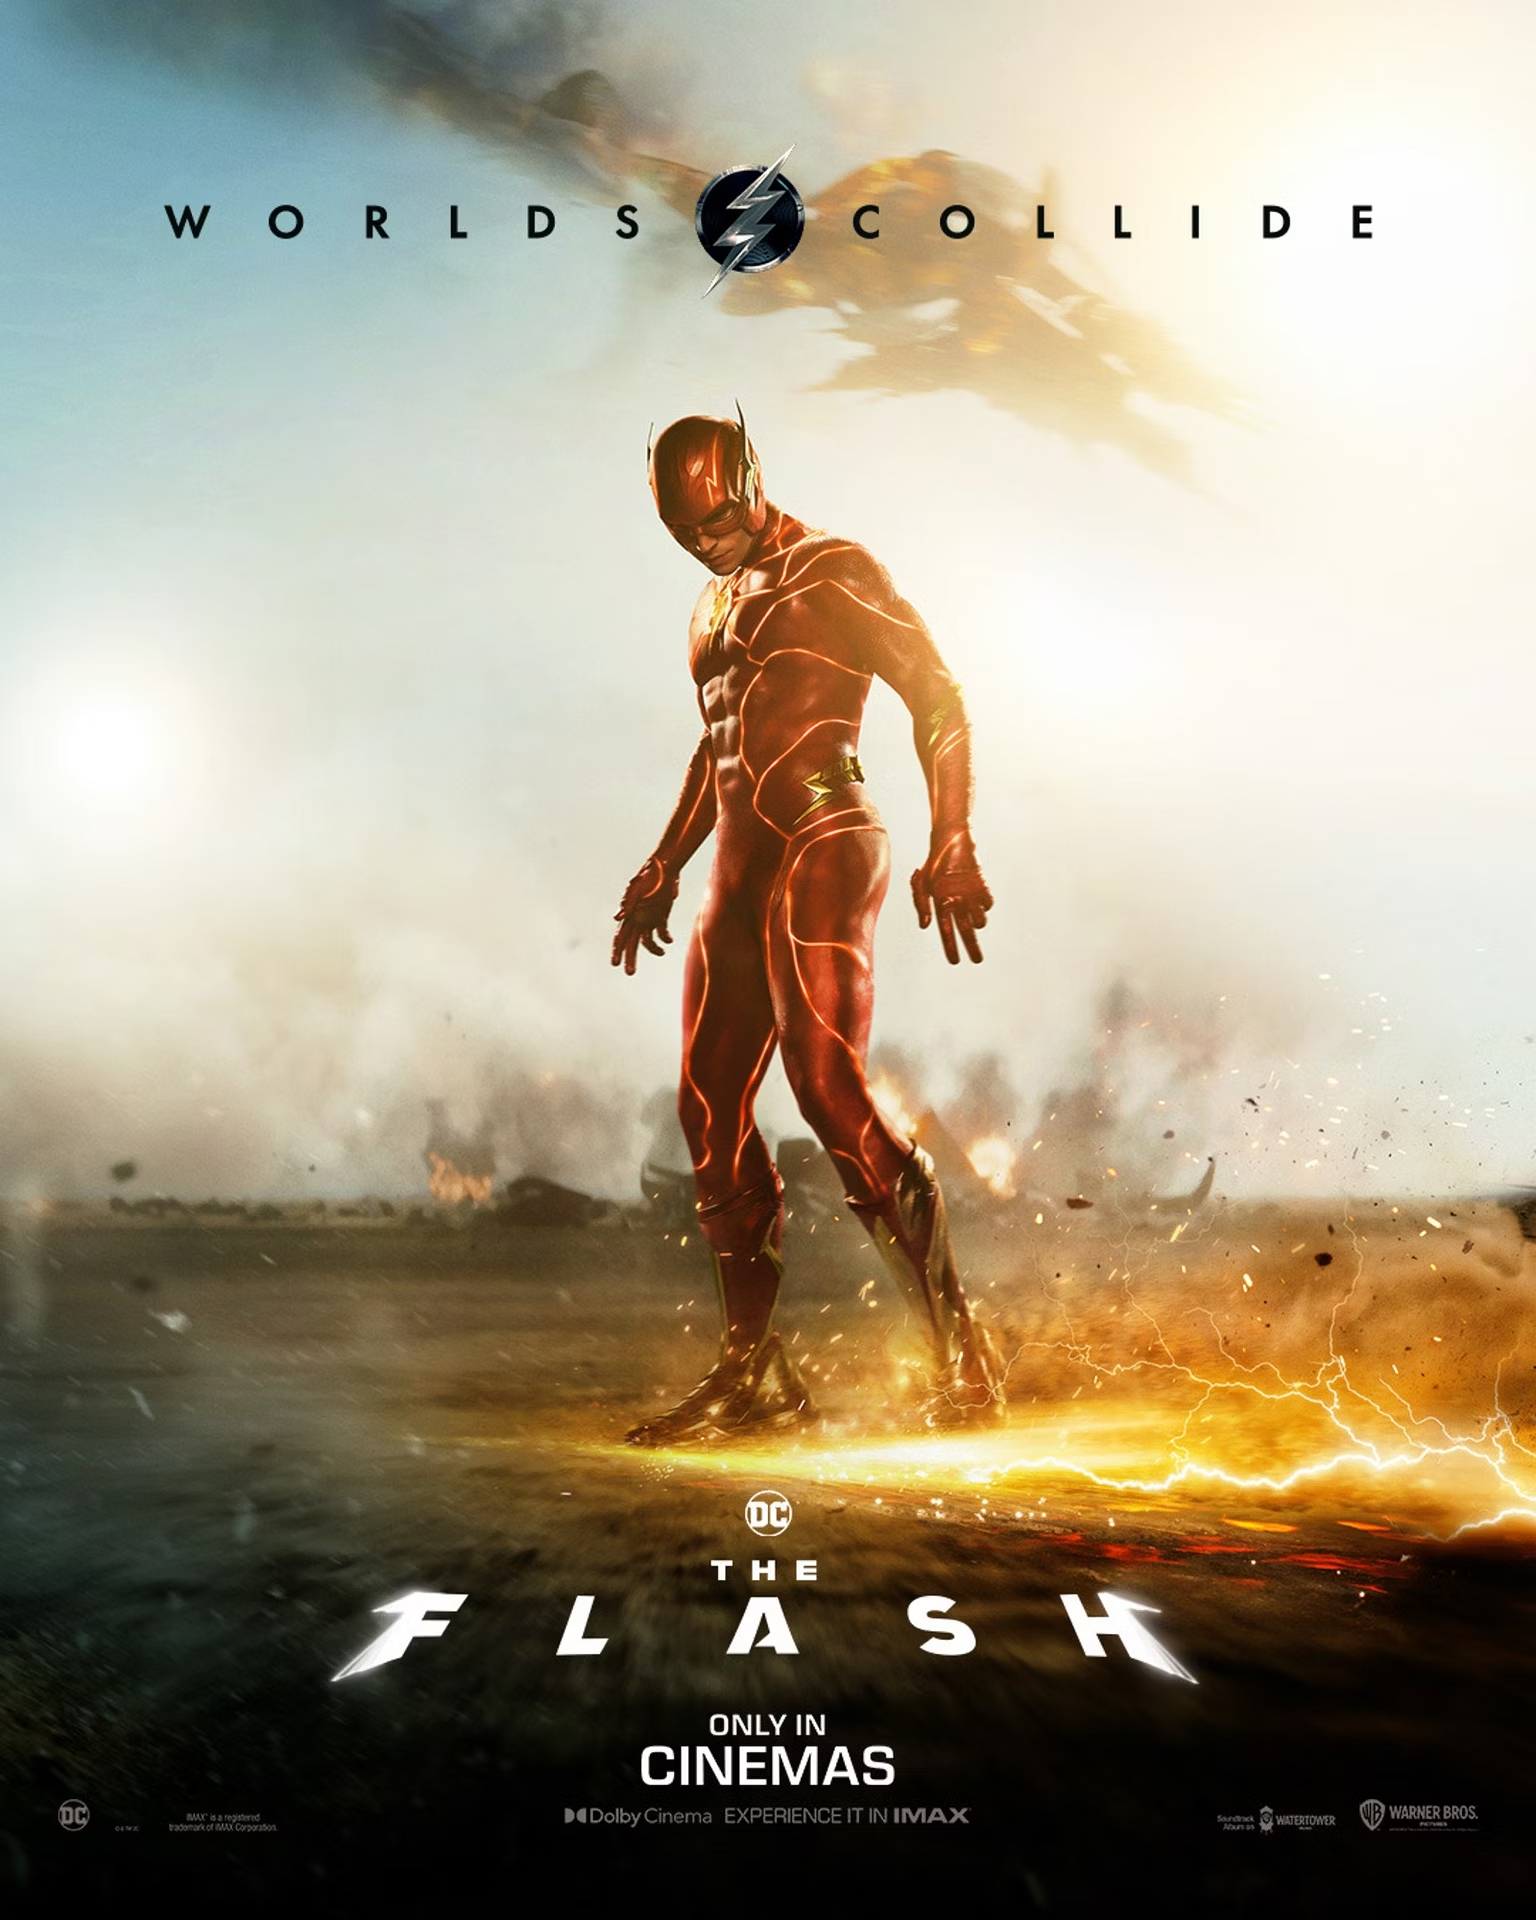 The Flash Jeremy Irons Trailer & Poster 4